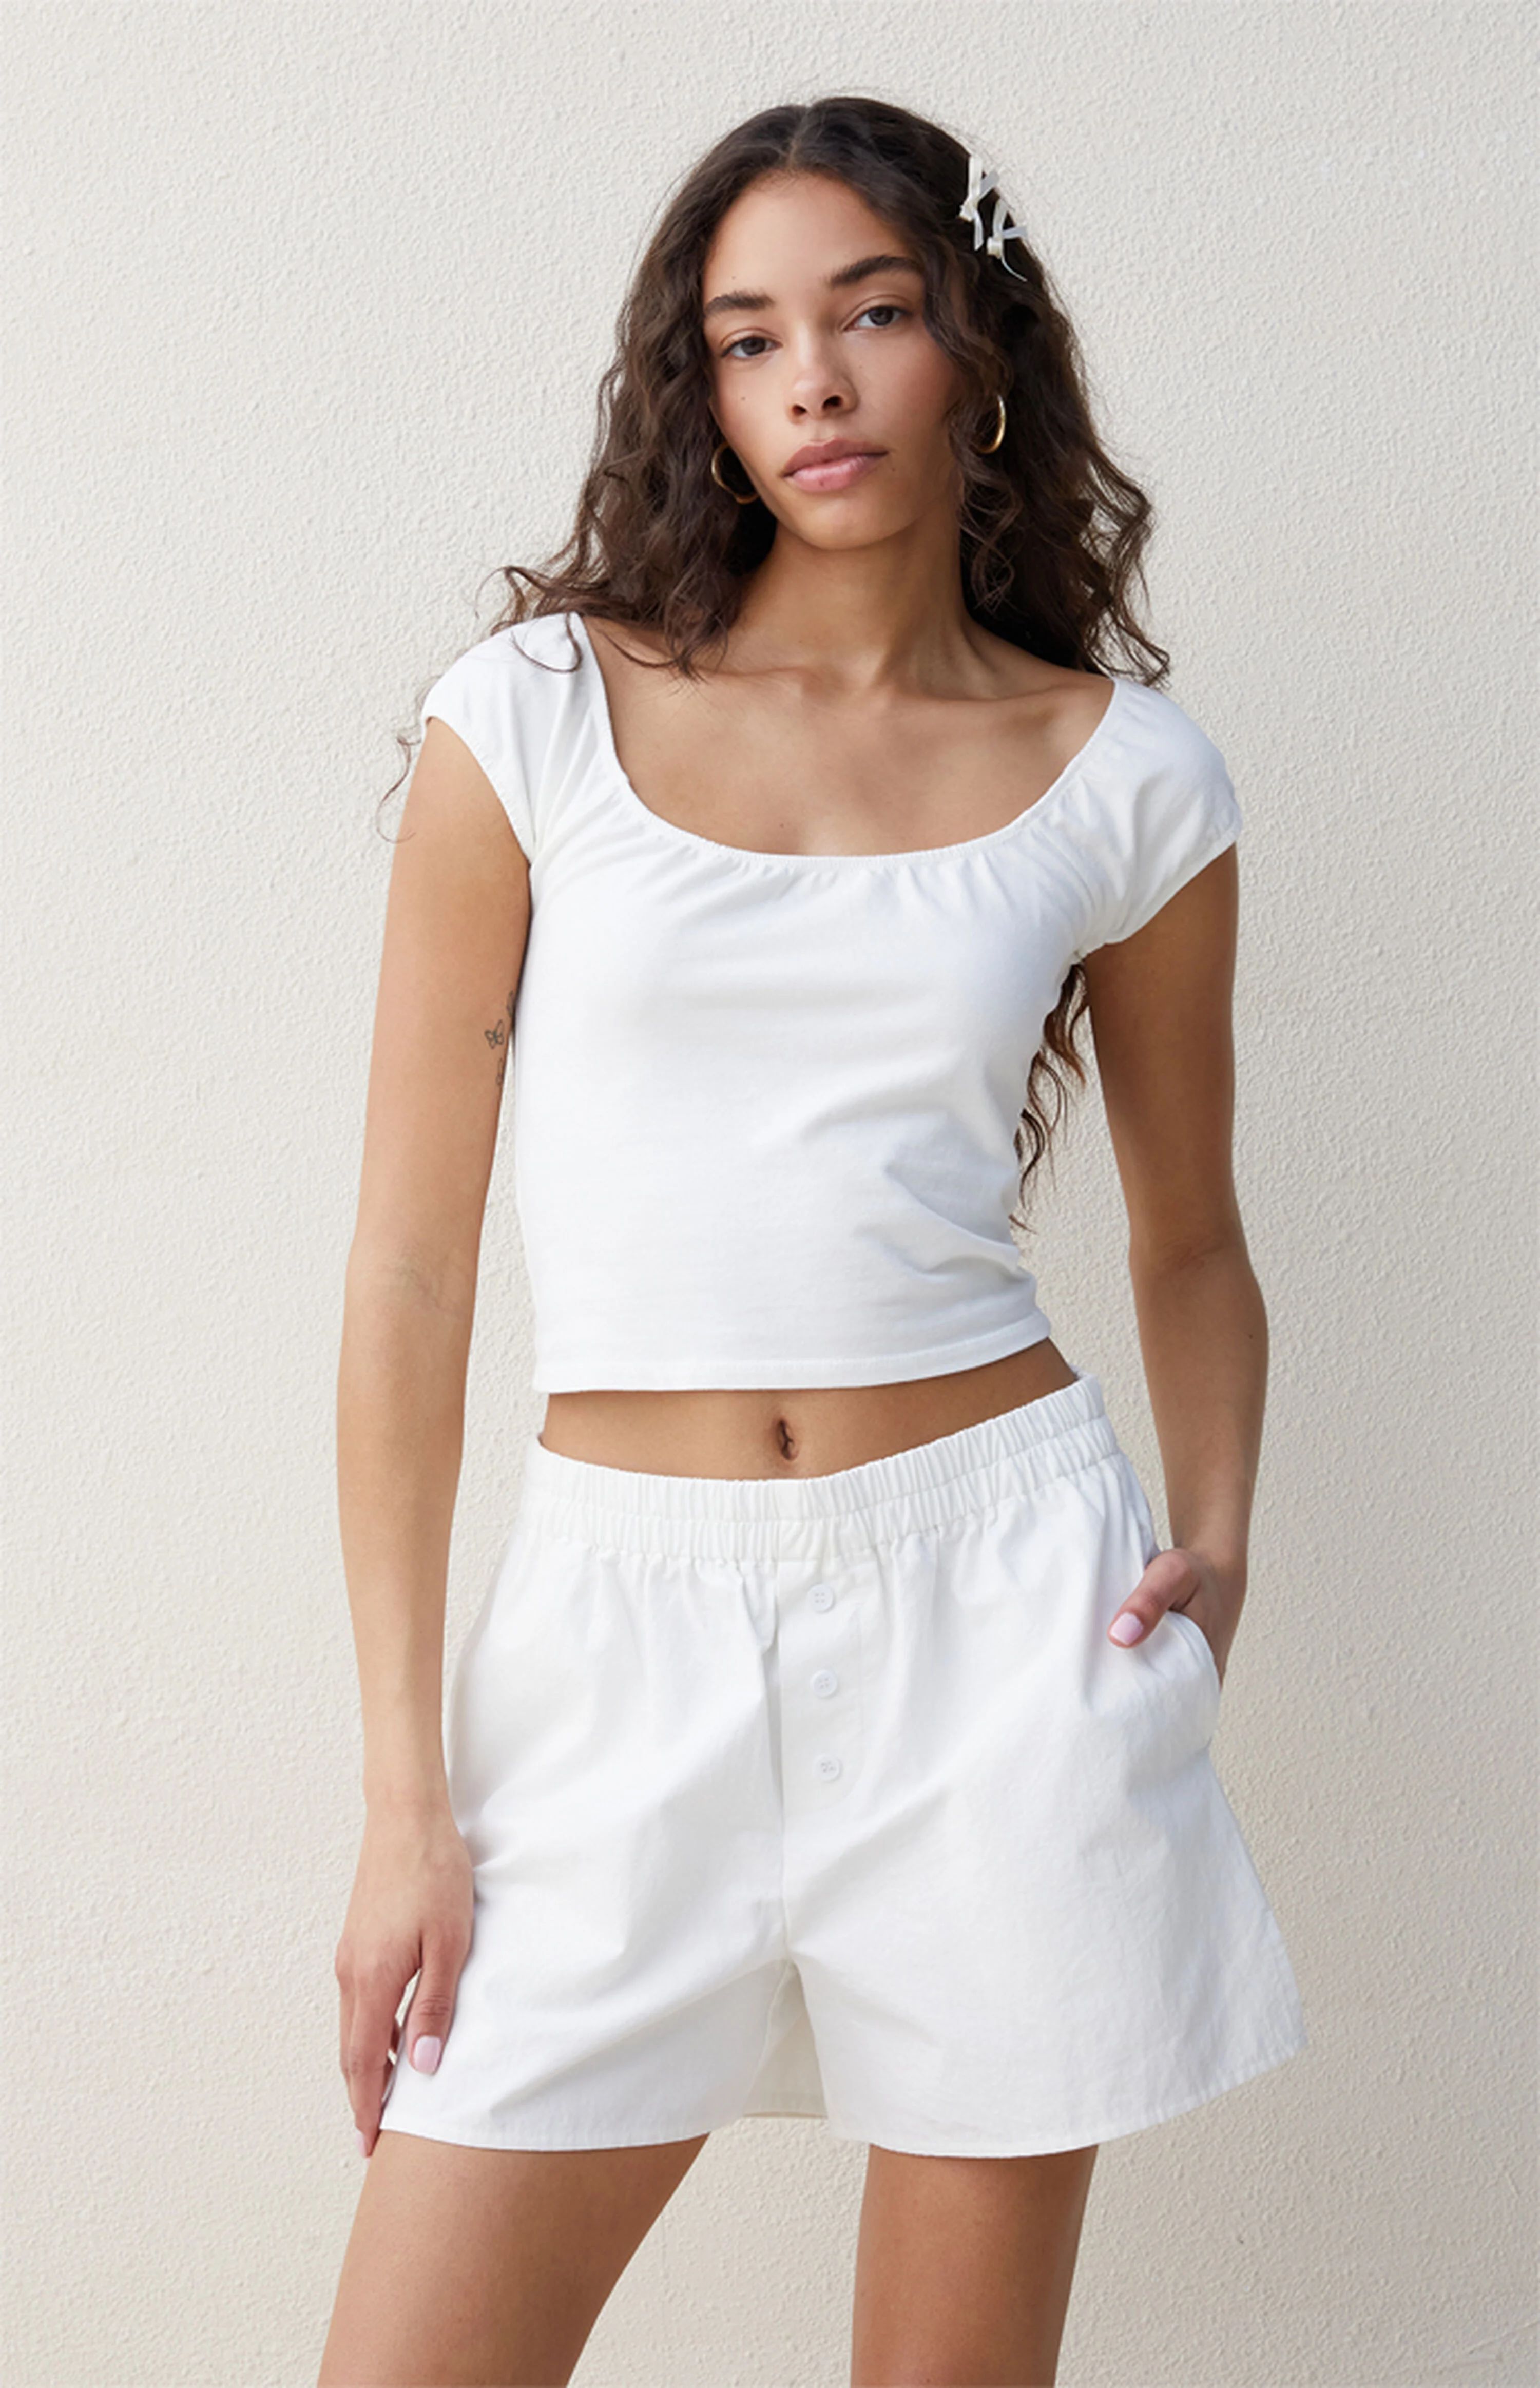 Beverly & Beck White Boxer Shorts



174 | PacSun